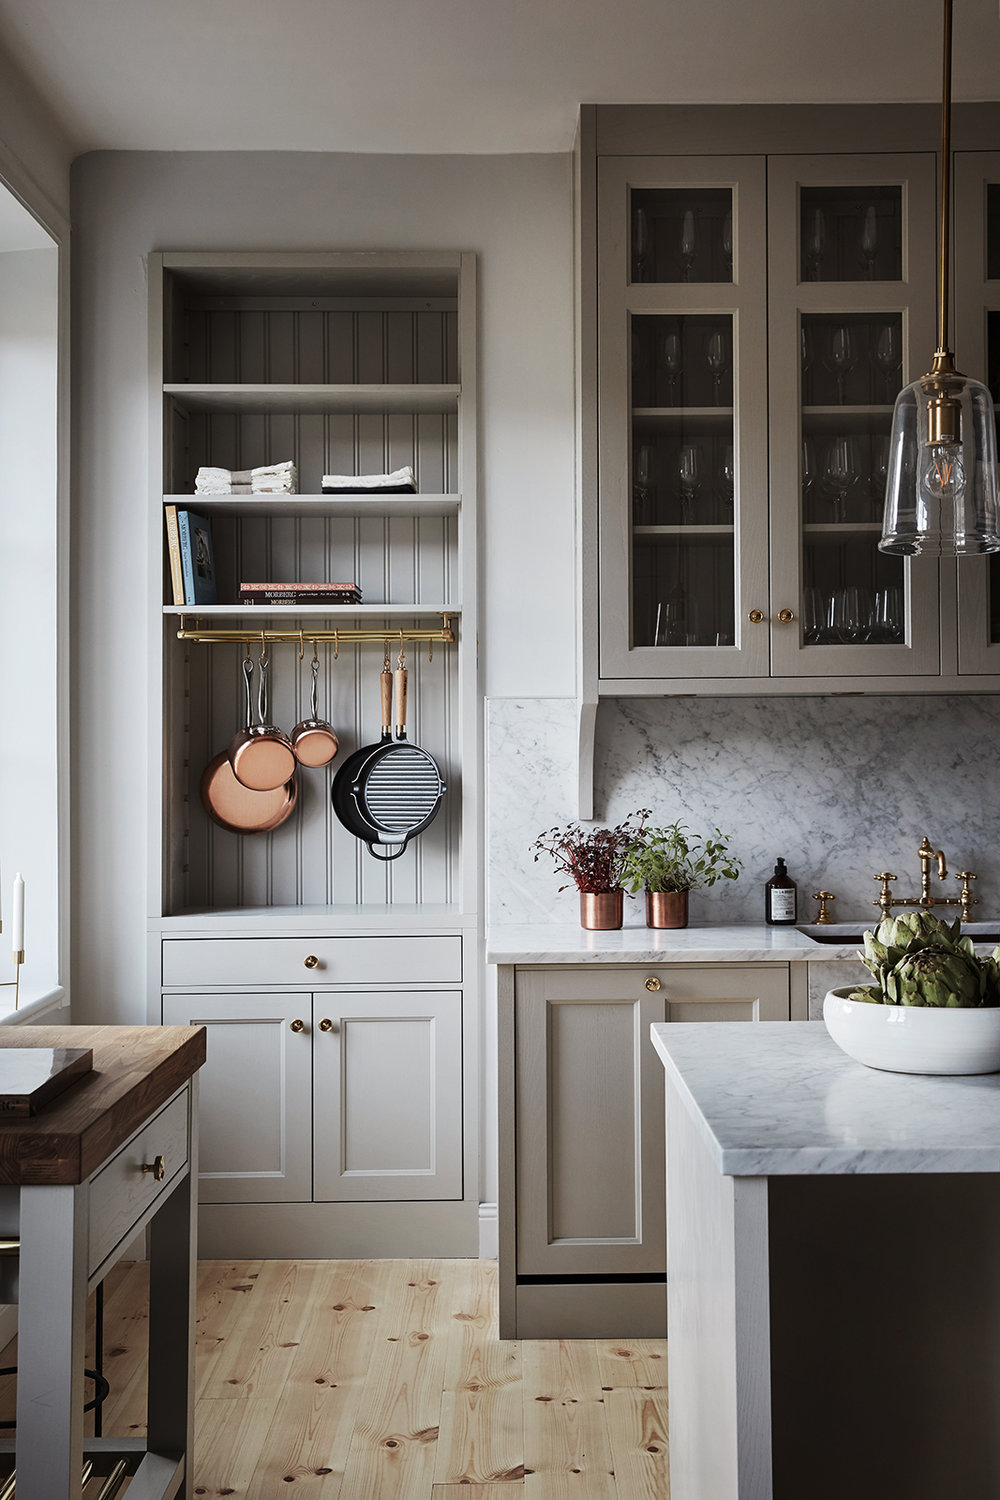 18 Great Neutral Cabinet Colors for kitchens — The Grit and Polish